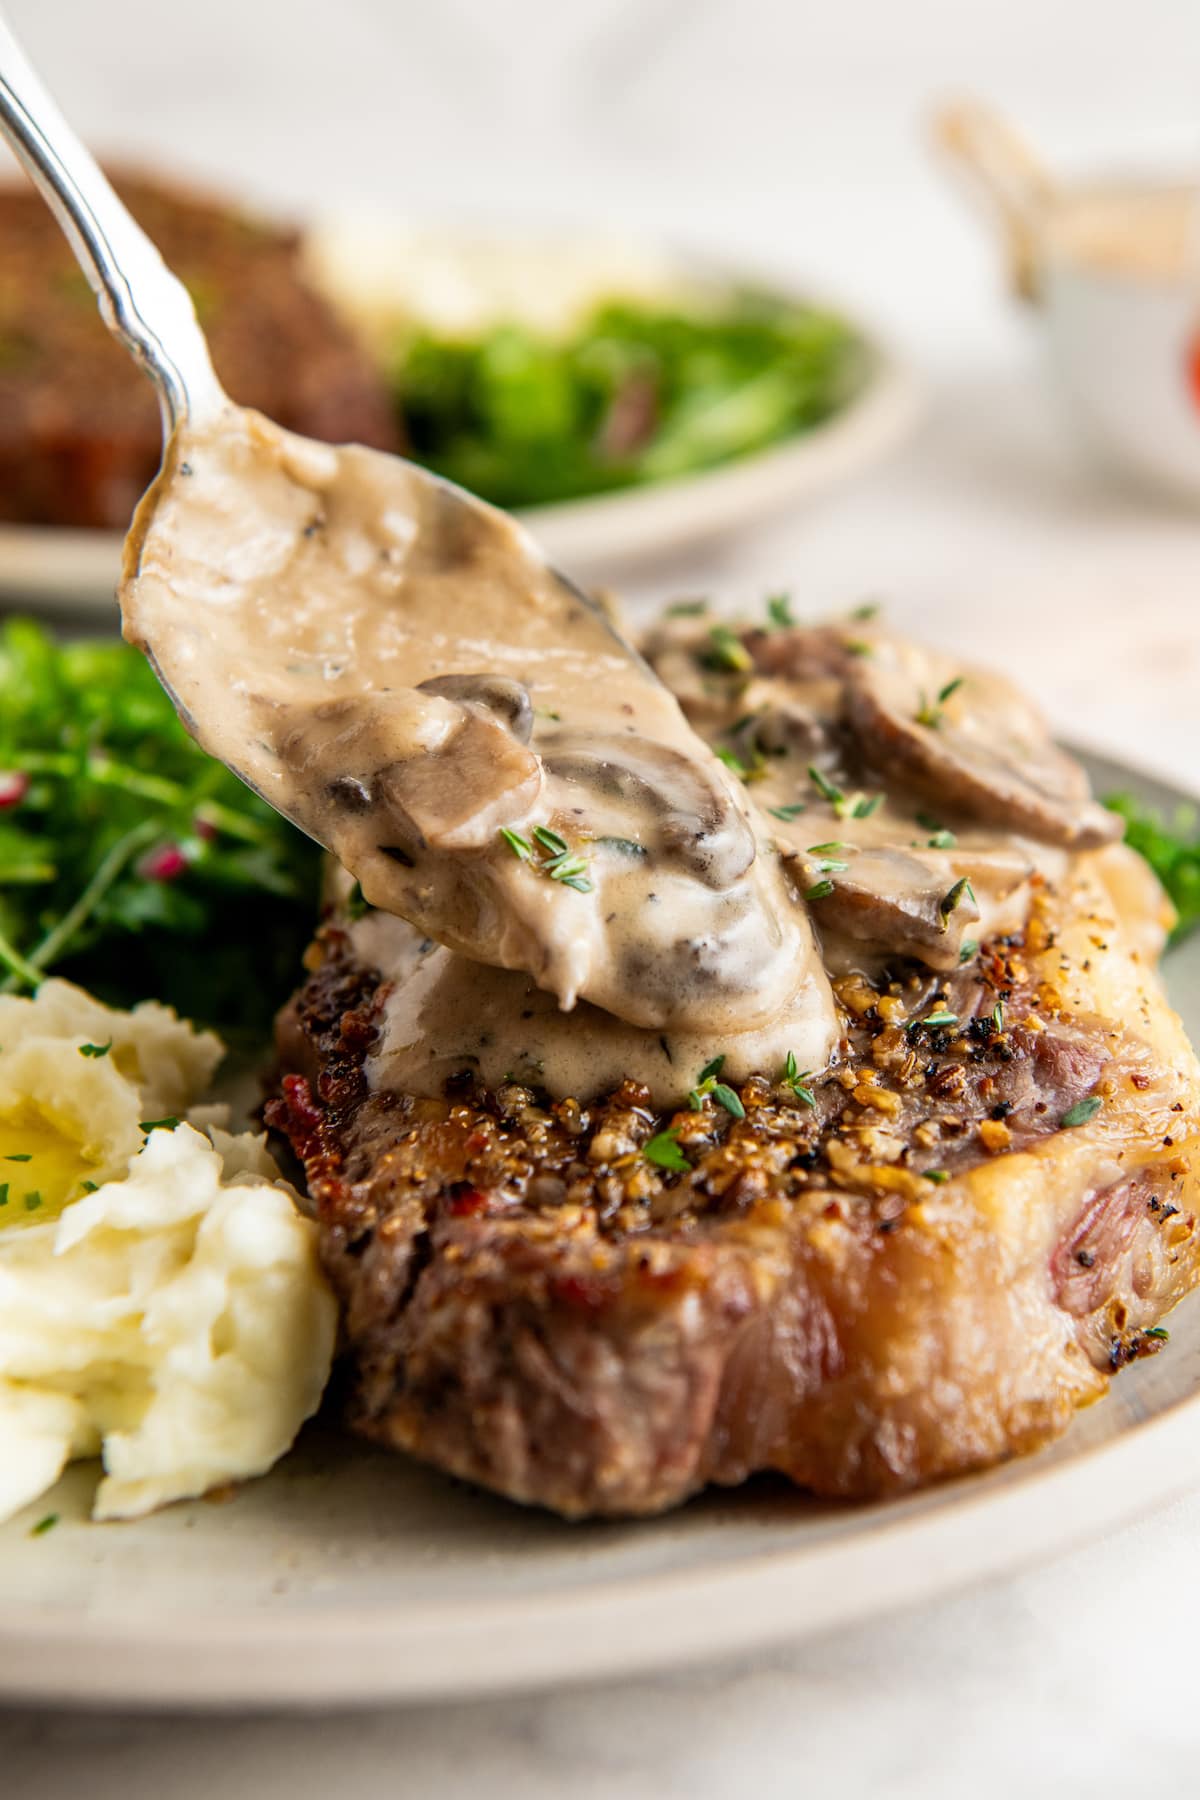 Spooning creamy mushroom sauce over a juicy steak with a side of potatoes and salad.